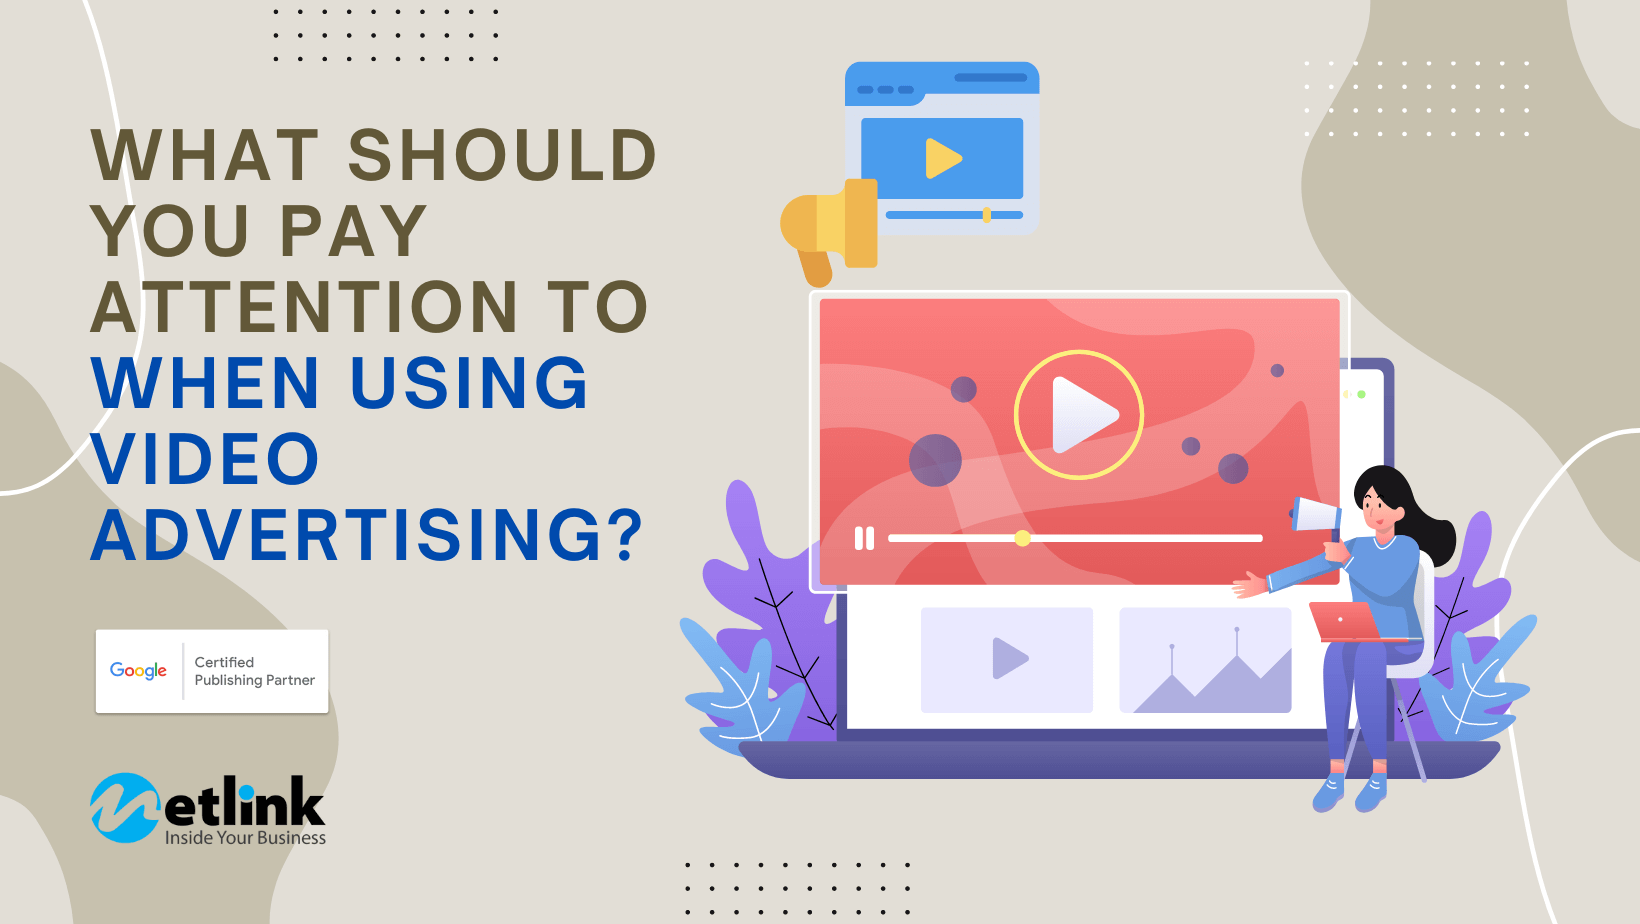 What Should You Pay Attention to When Using Video Advertising?